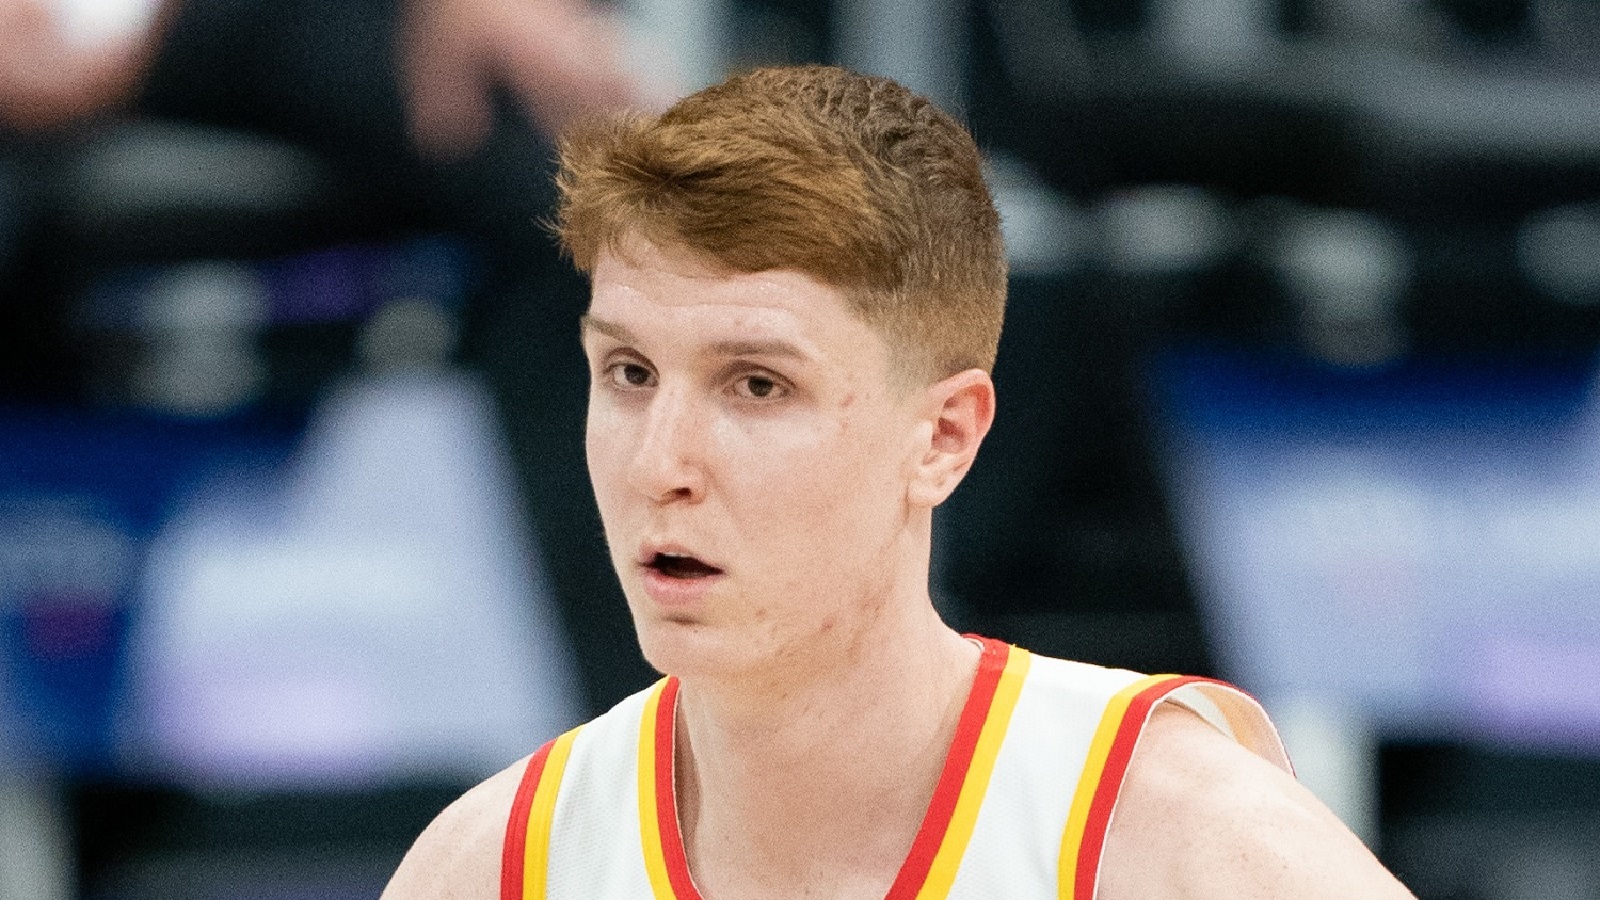 What to know about Atlanta Hawks guard Kevin Huerter